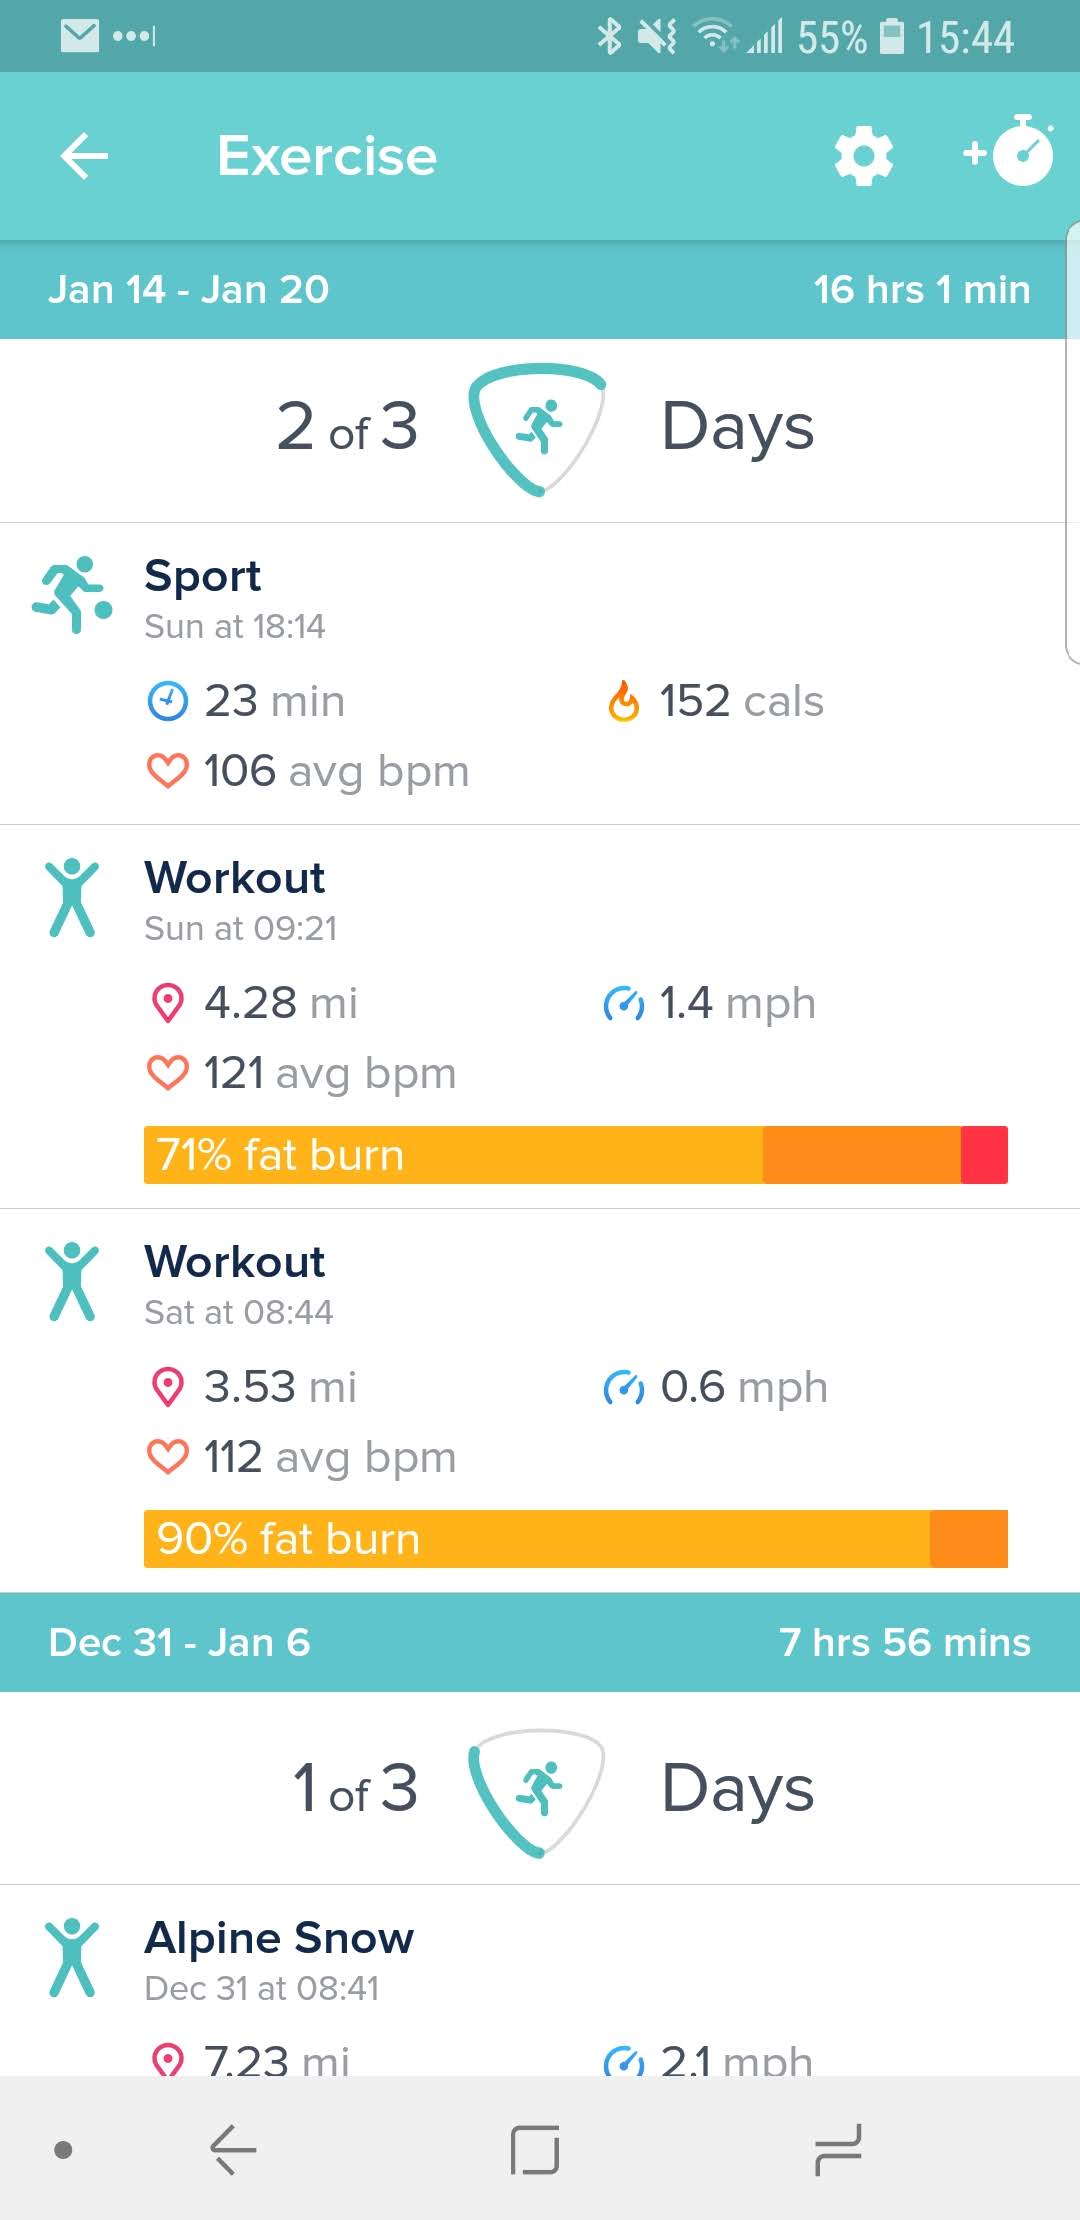 fitbit skiing